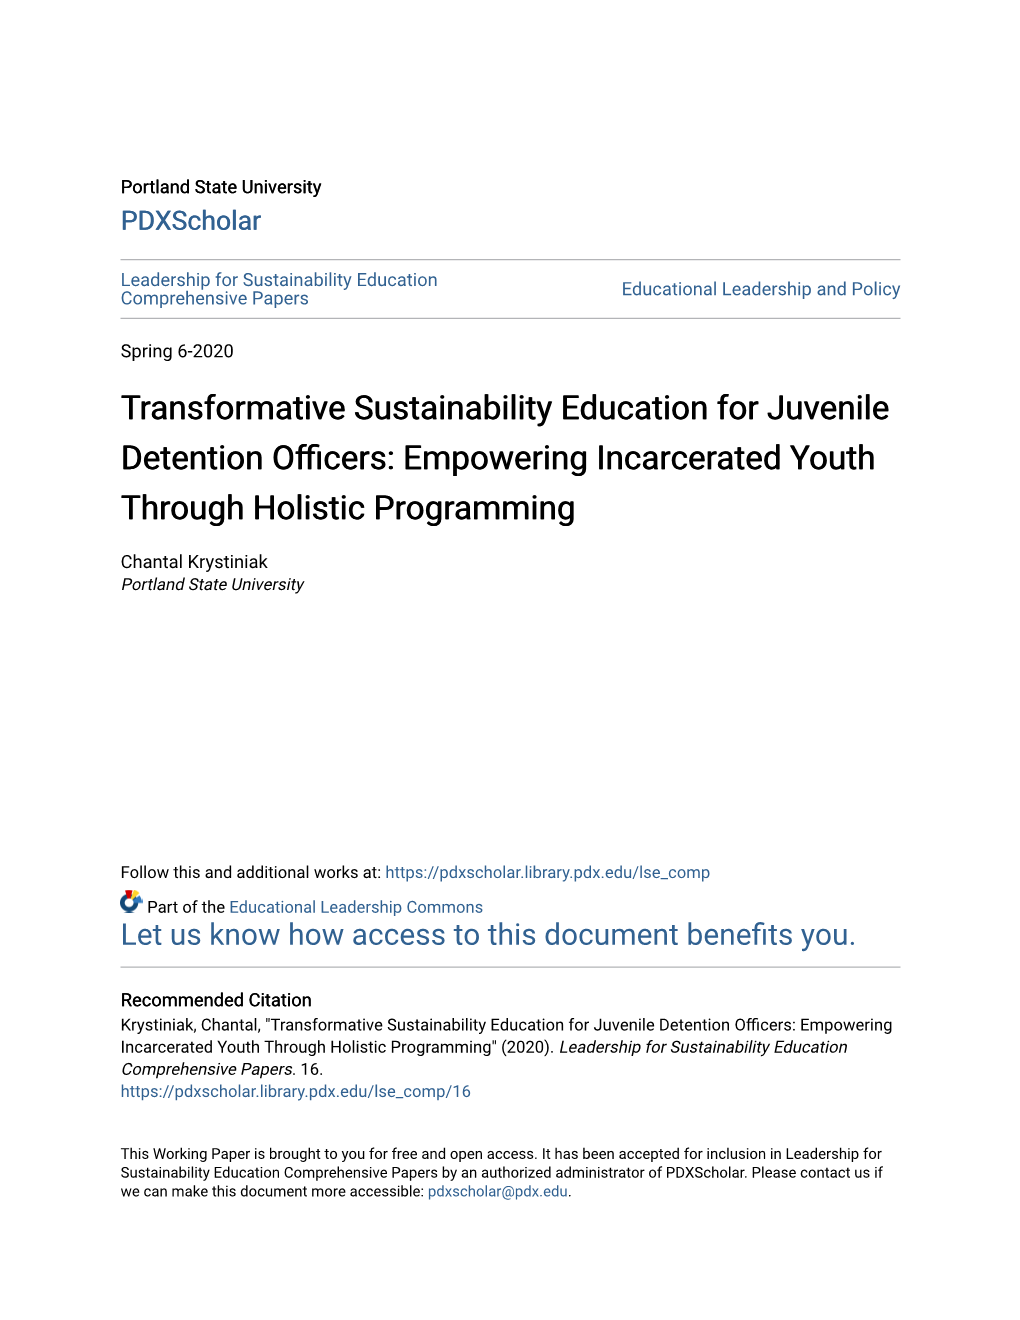 Transformative Sustainability Education for Juvenile Detention Officers: Empowering Incarcerated Youth Through Holistic Programming